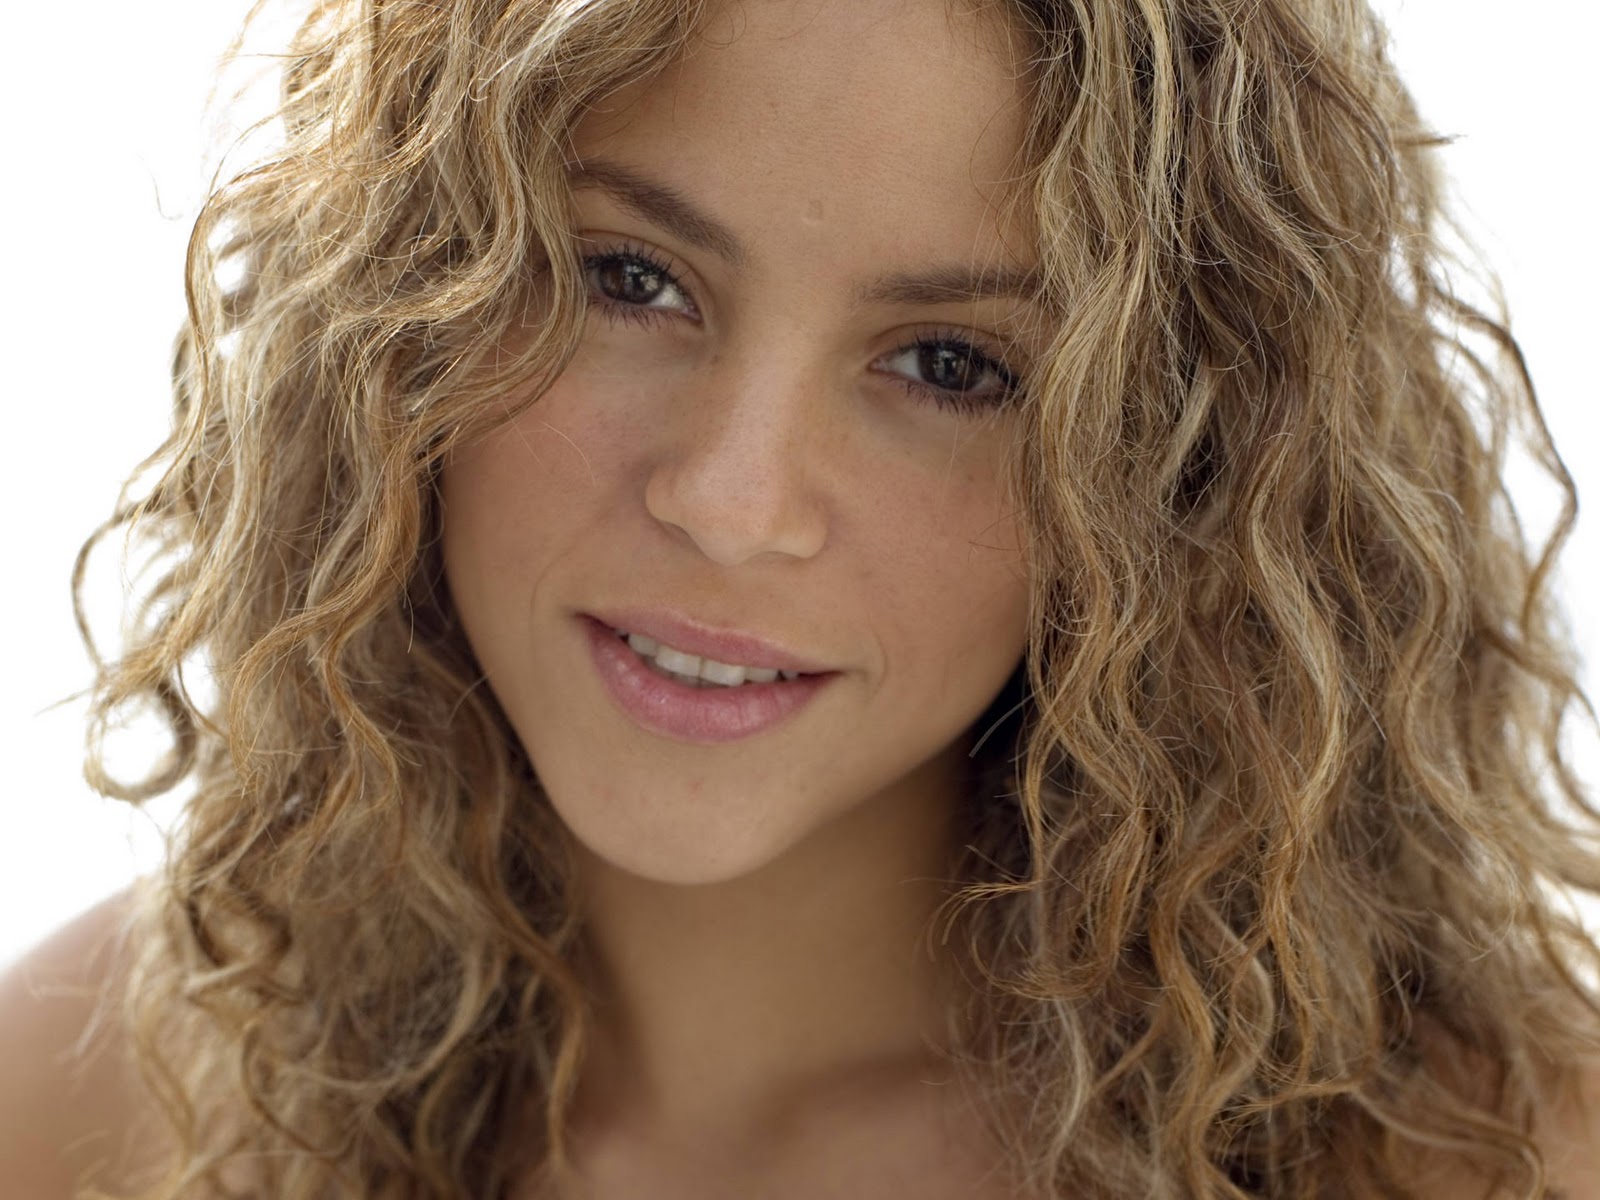 world picture gallery: shakira hot and beautiful wallpapers